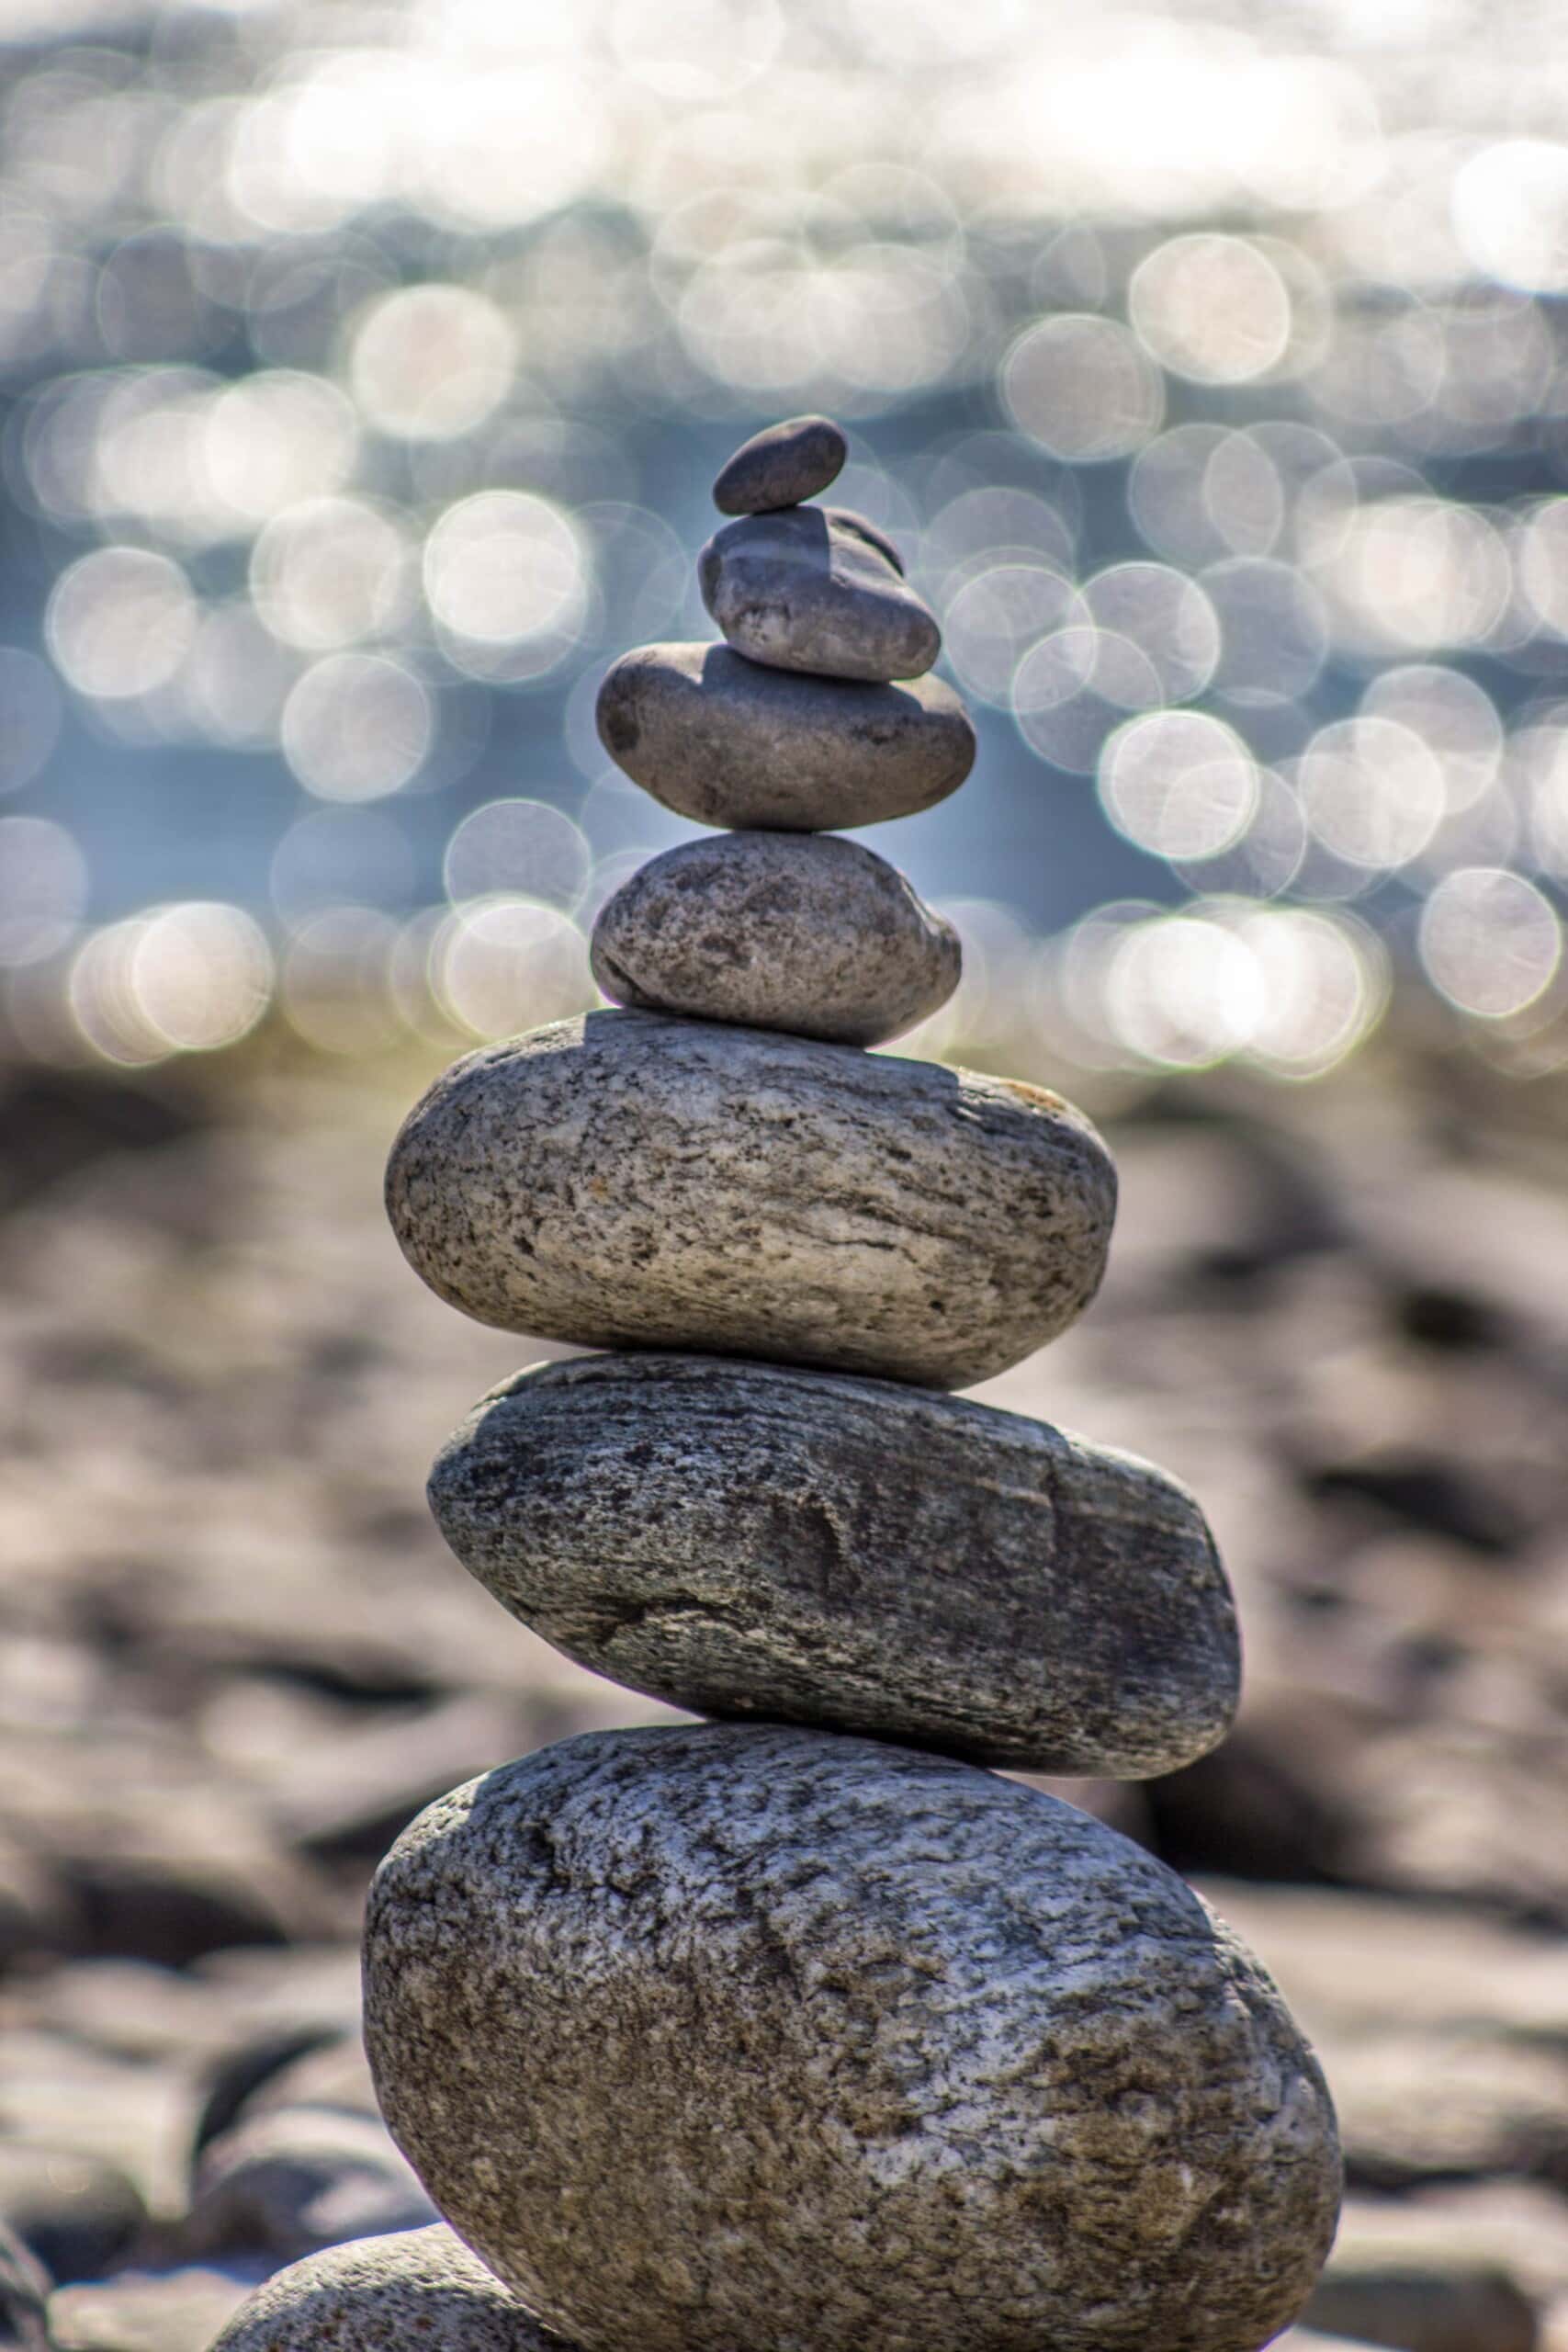 Pebbles on a beach balancing on one another